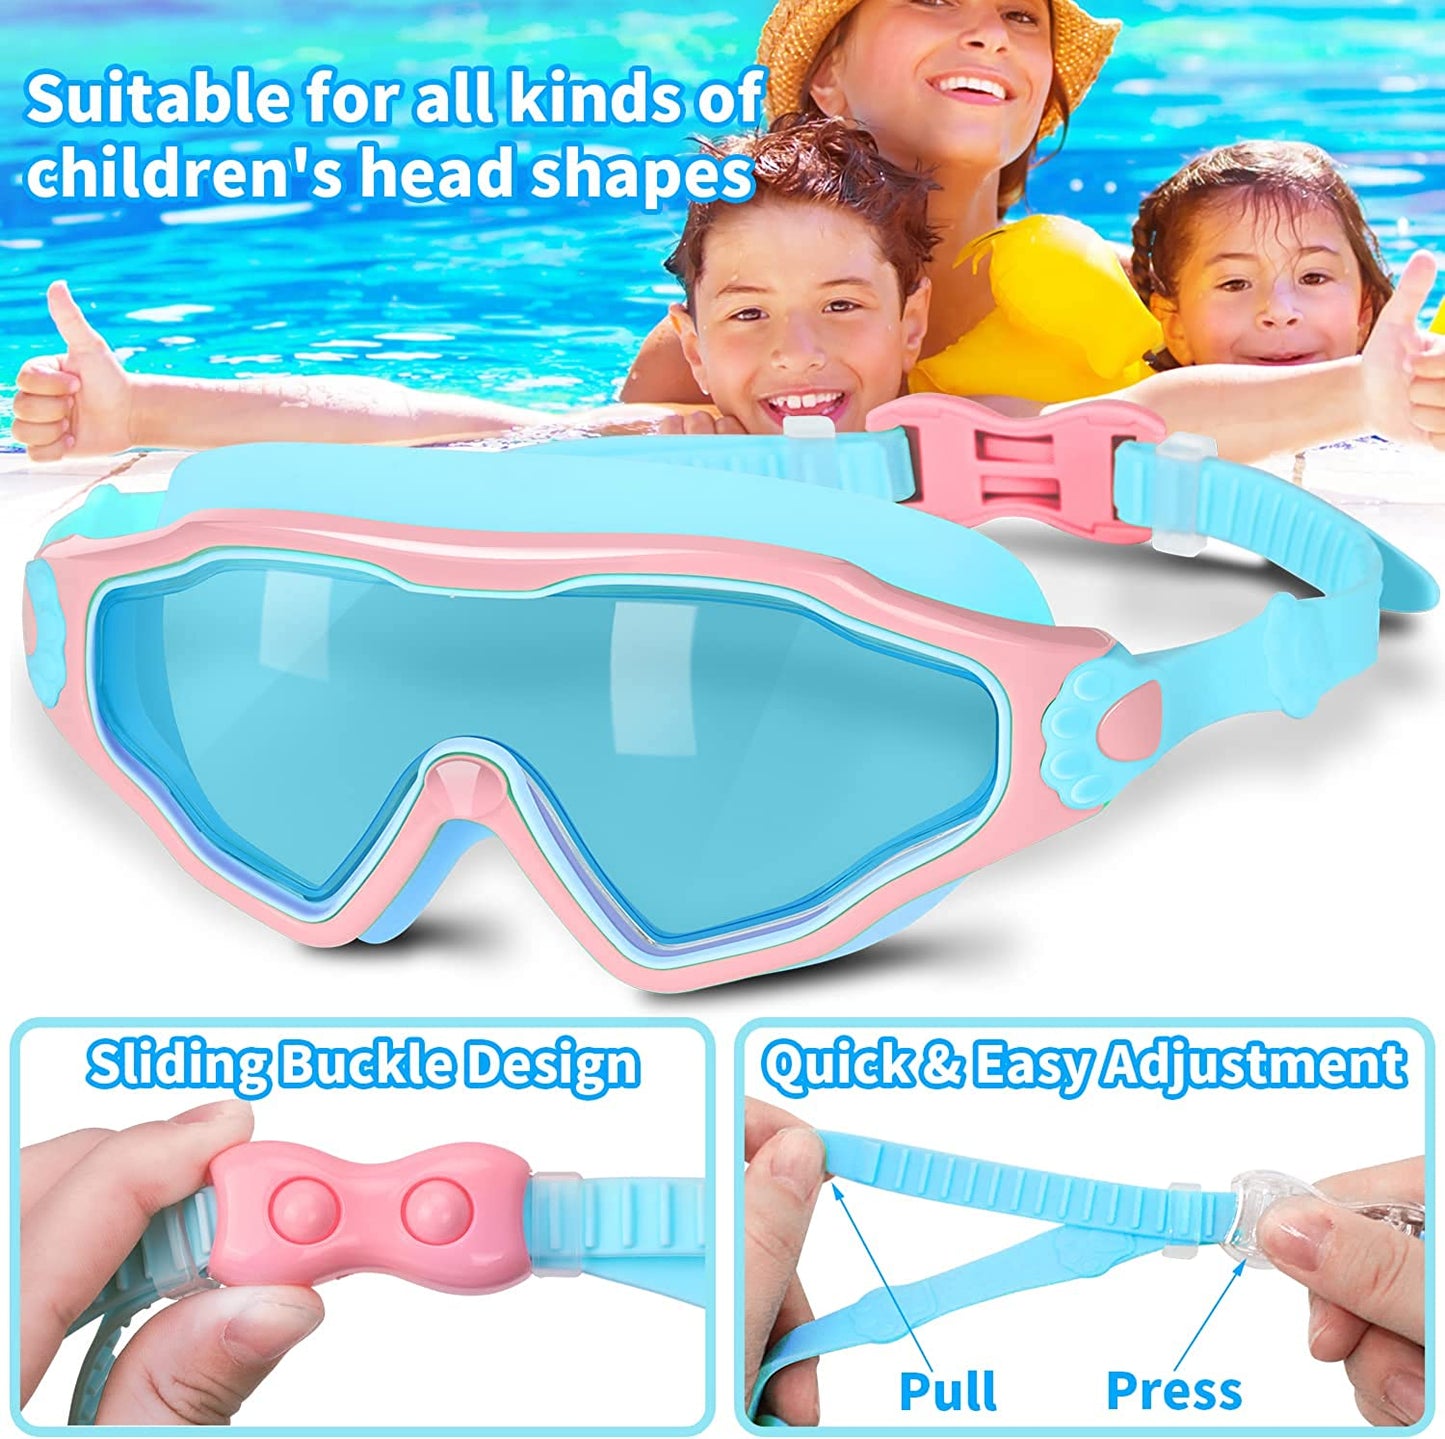 2-Pack Kids Swim Goggles, Wide View Swimming Goggles for Kids, Child, Boys or Girls from 3-15, Anti-Fog, Waterproof